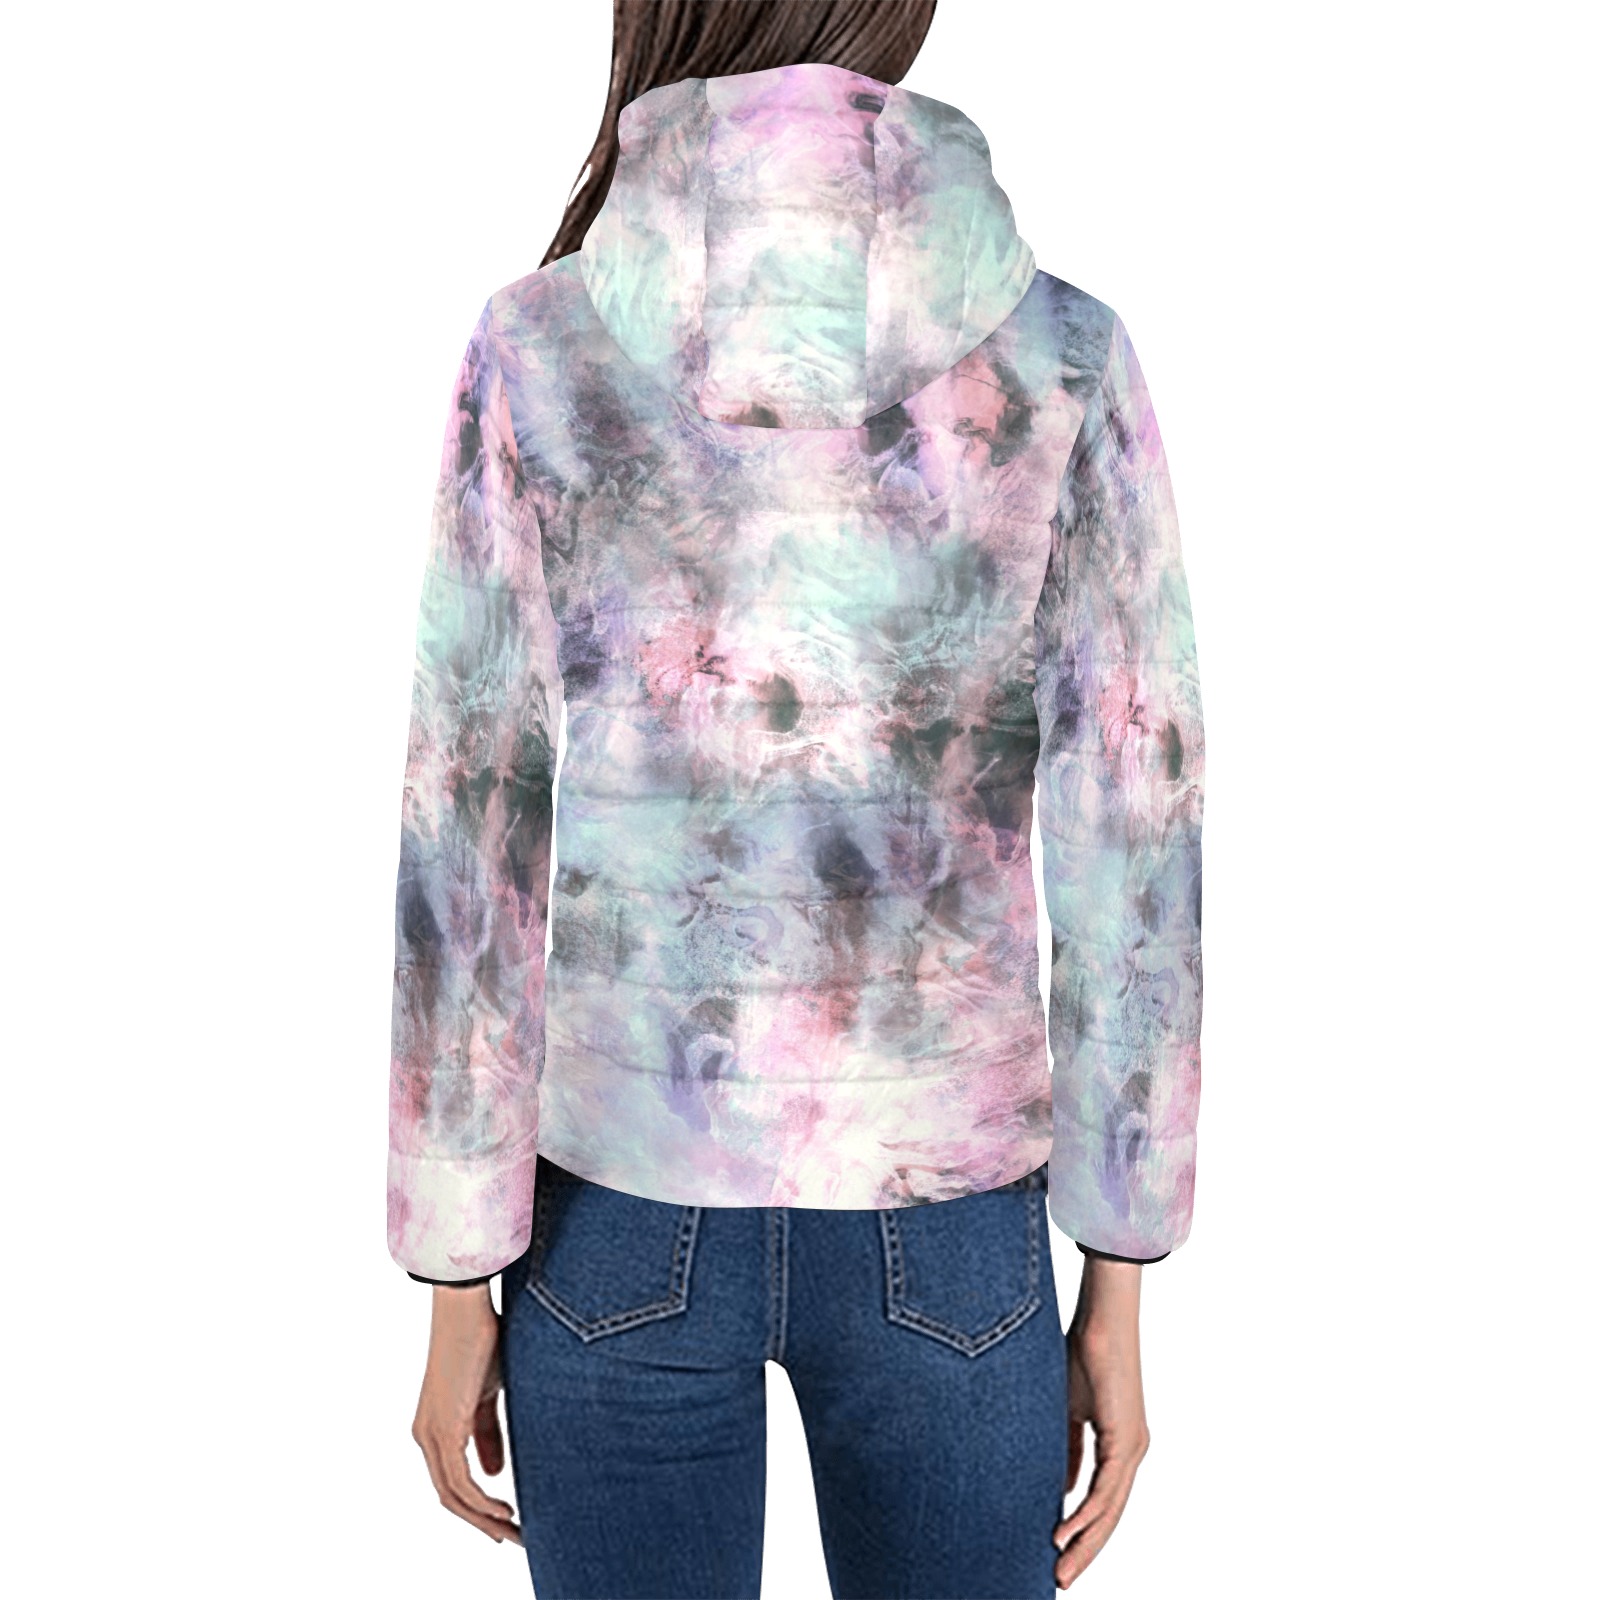 Colorful electric marbling Women's Padded Hooded Jacket (Model H46)